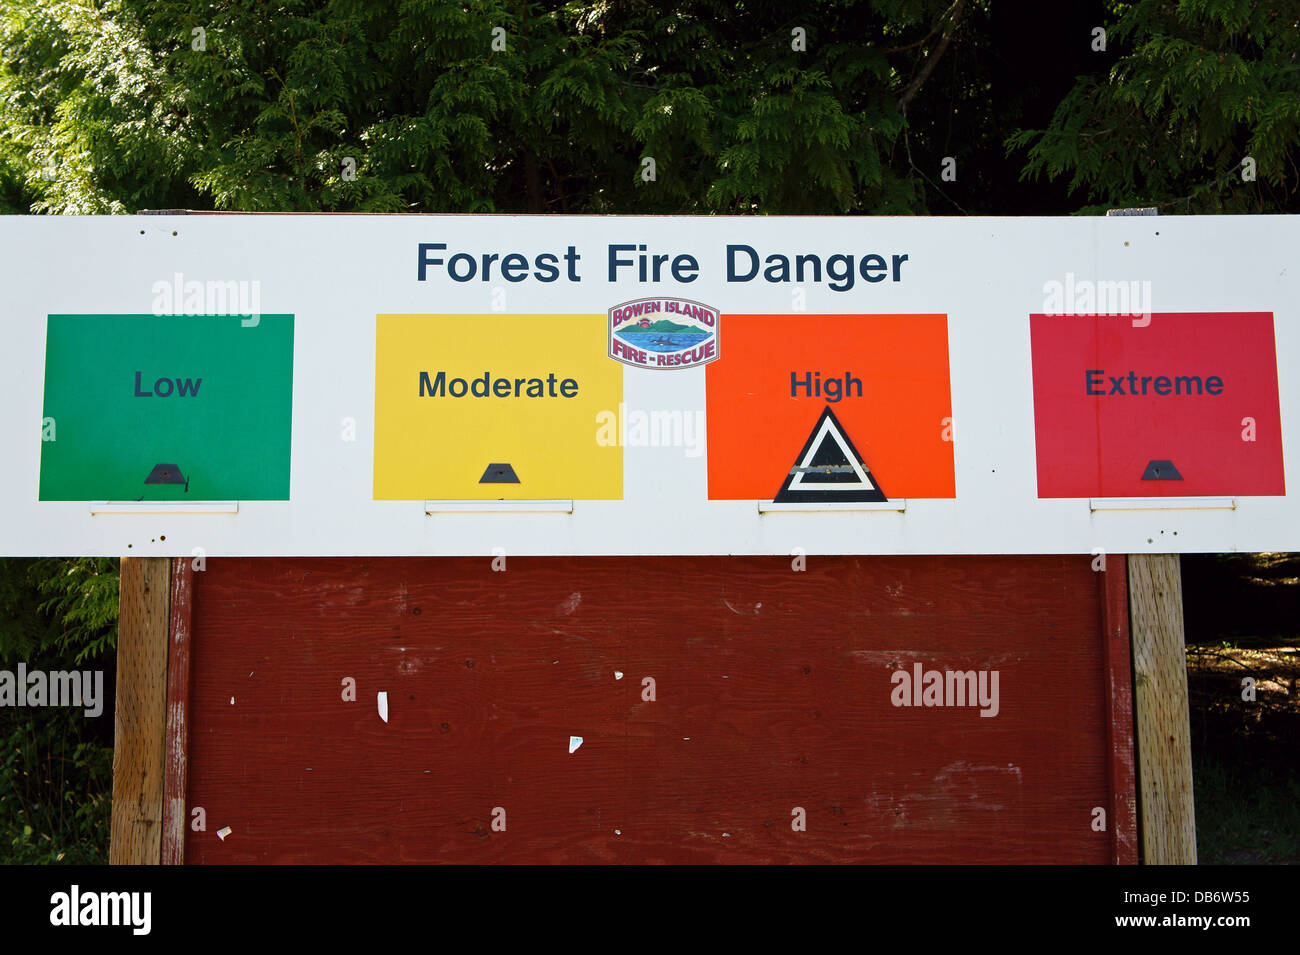 High forest fire danger sign on Bowen Island, Vancouver, BC, Canada Stock Photo